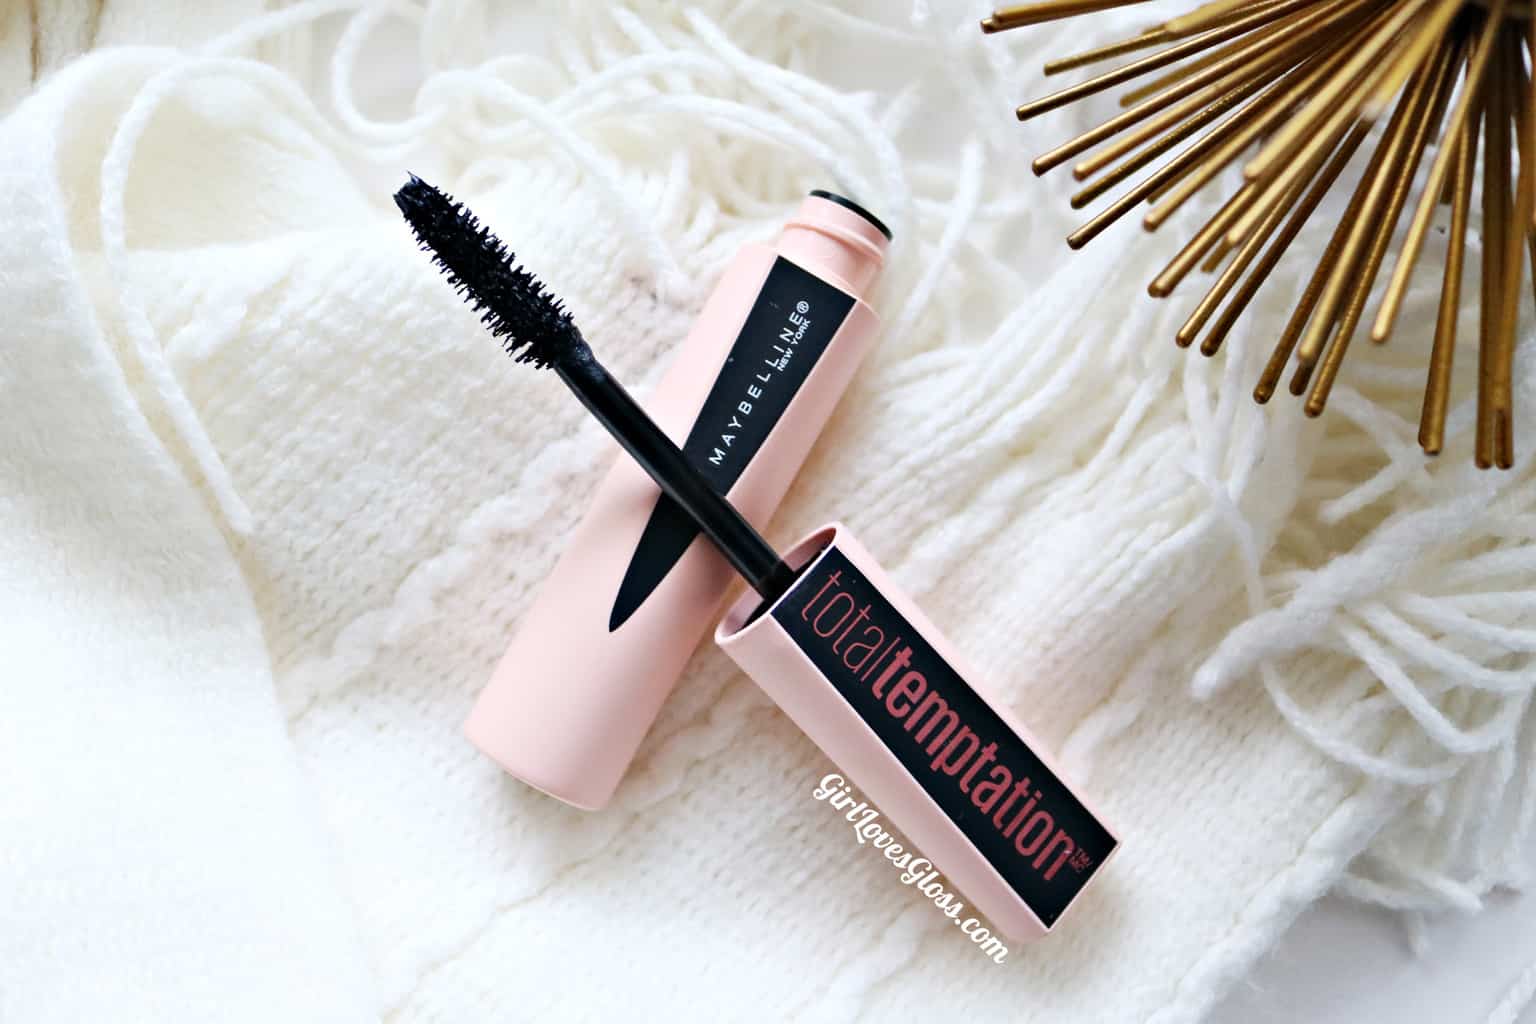 Maybelline Total Temptation Mascara Review